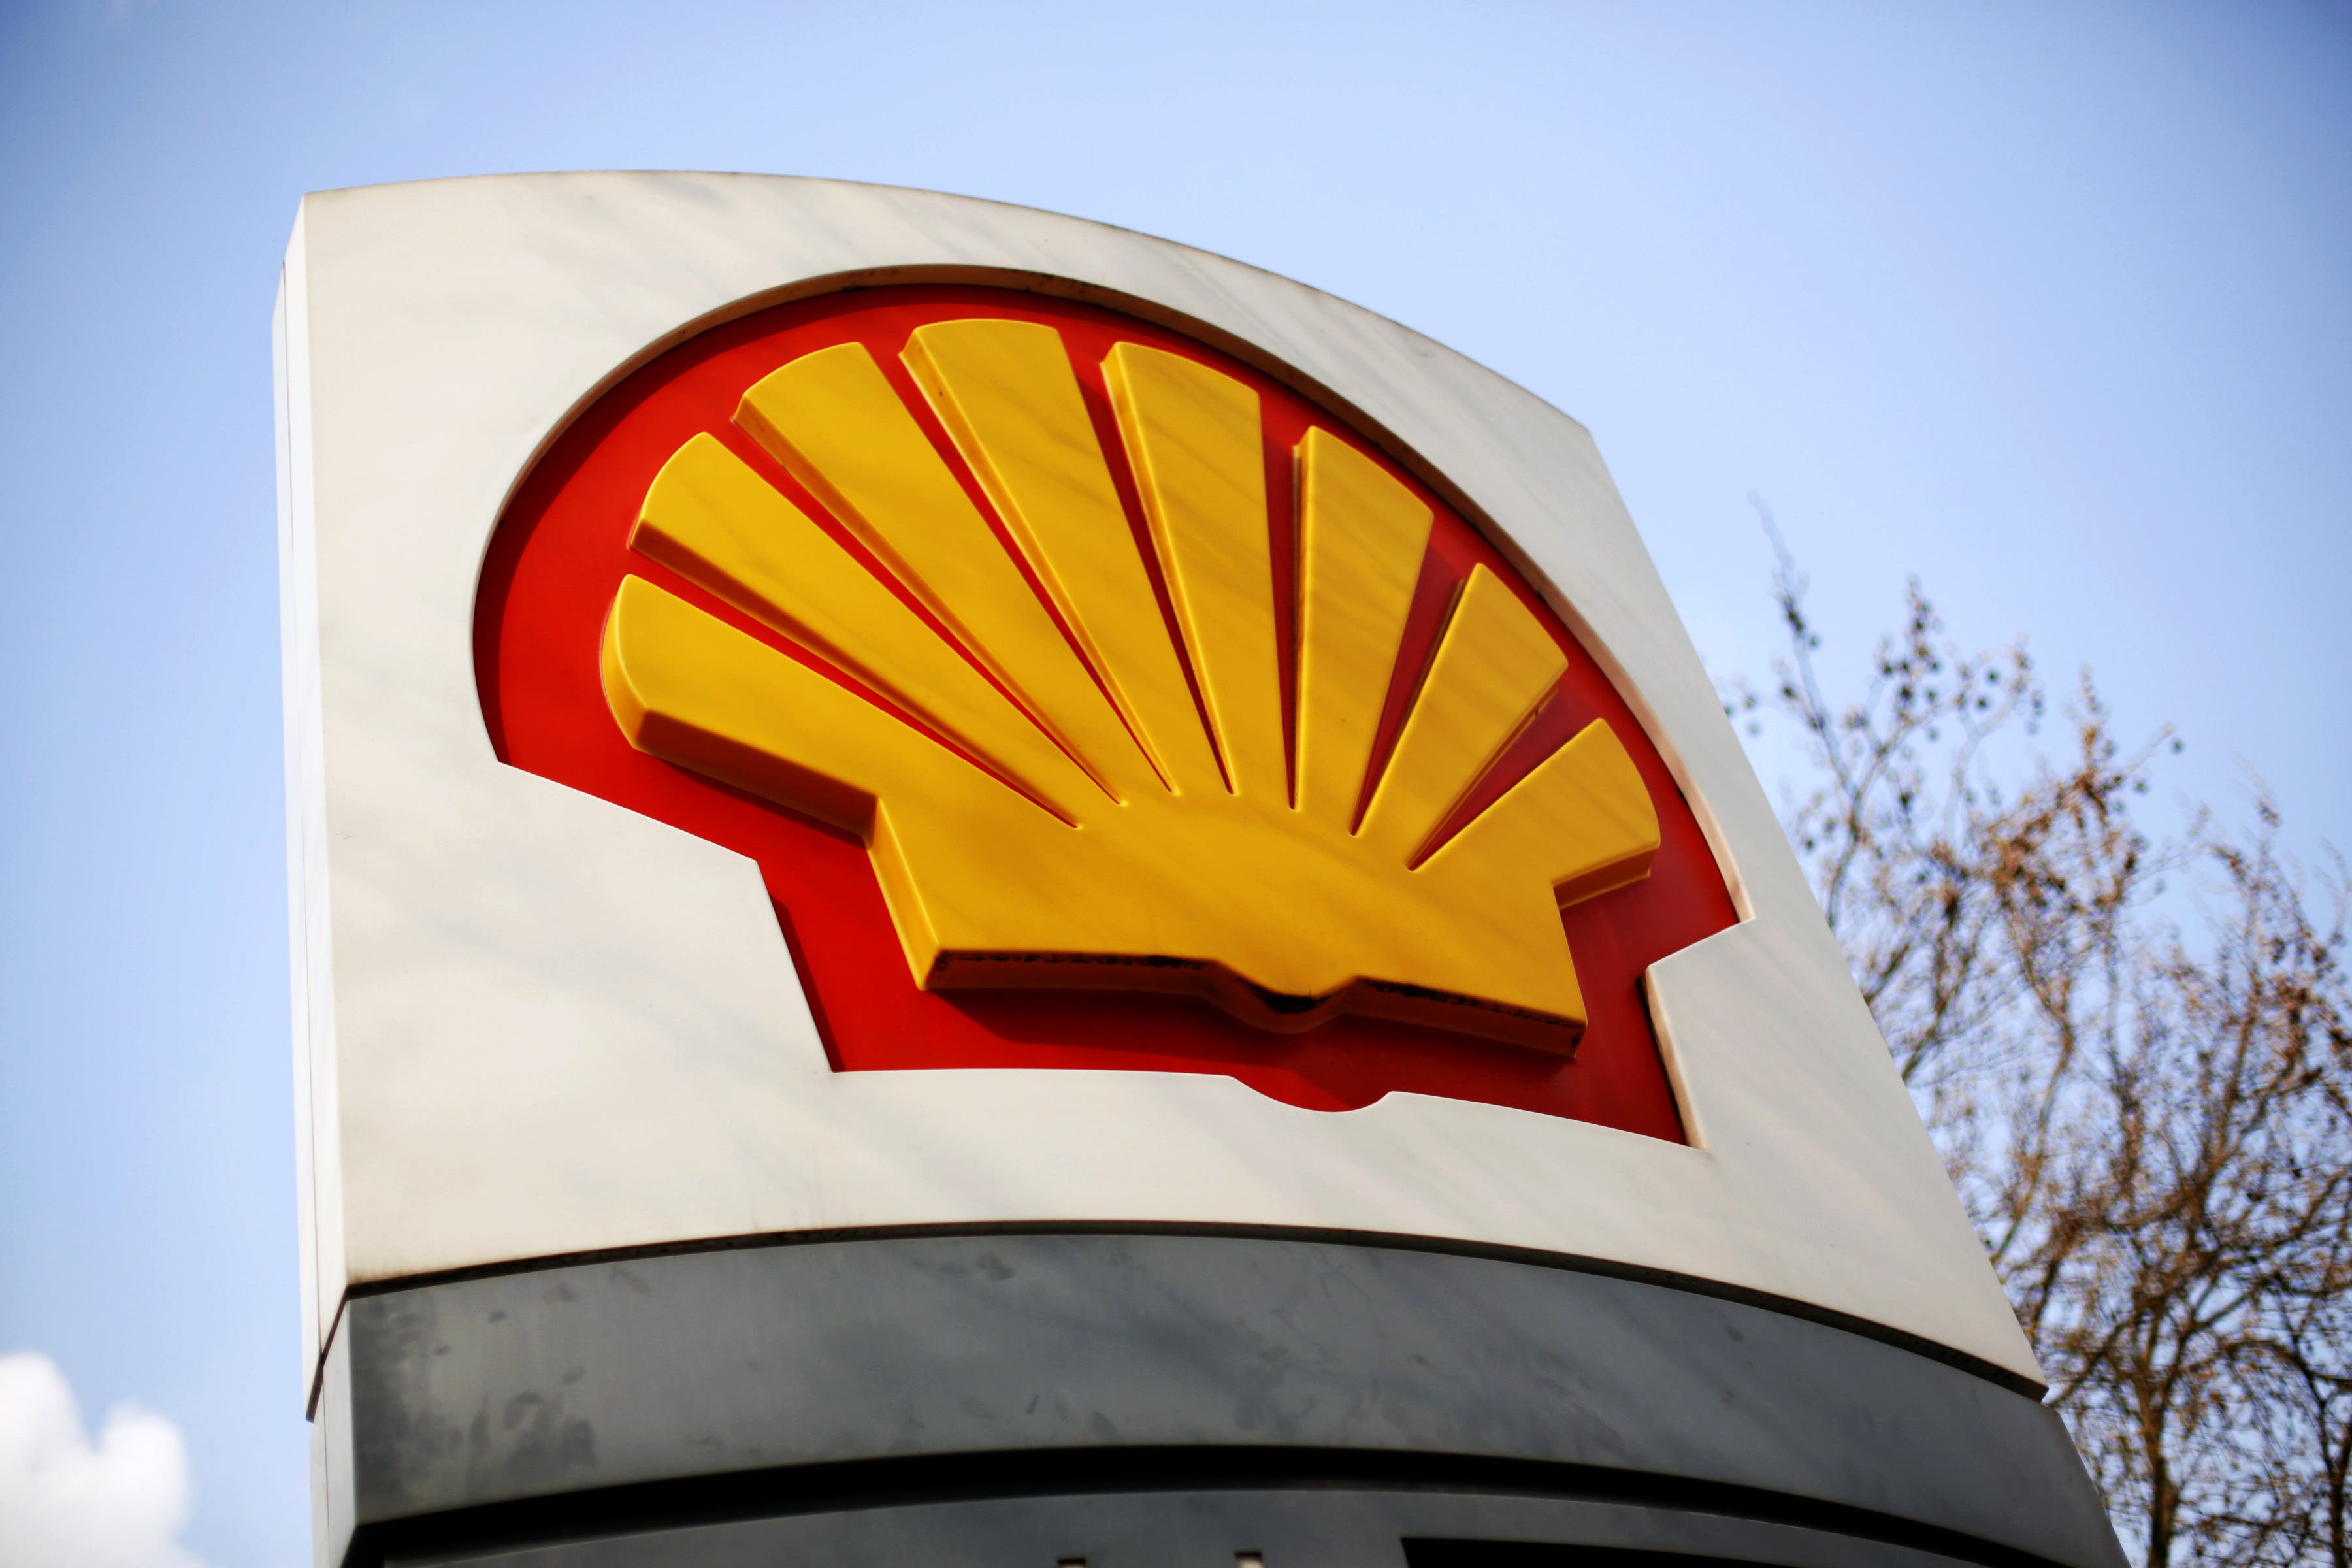 The company logo at a Shell petrol station in London